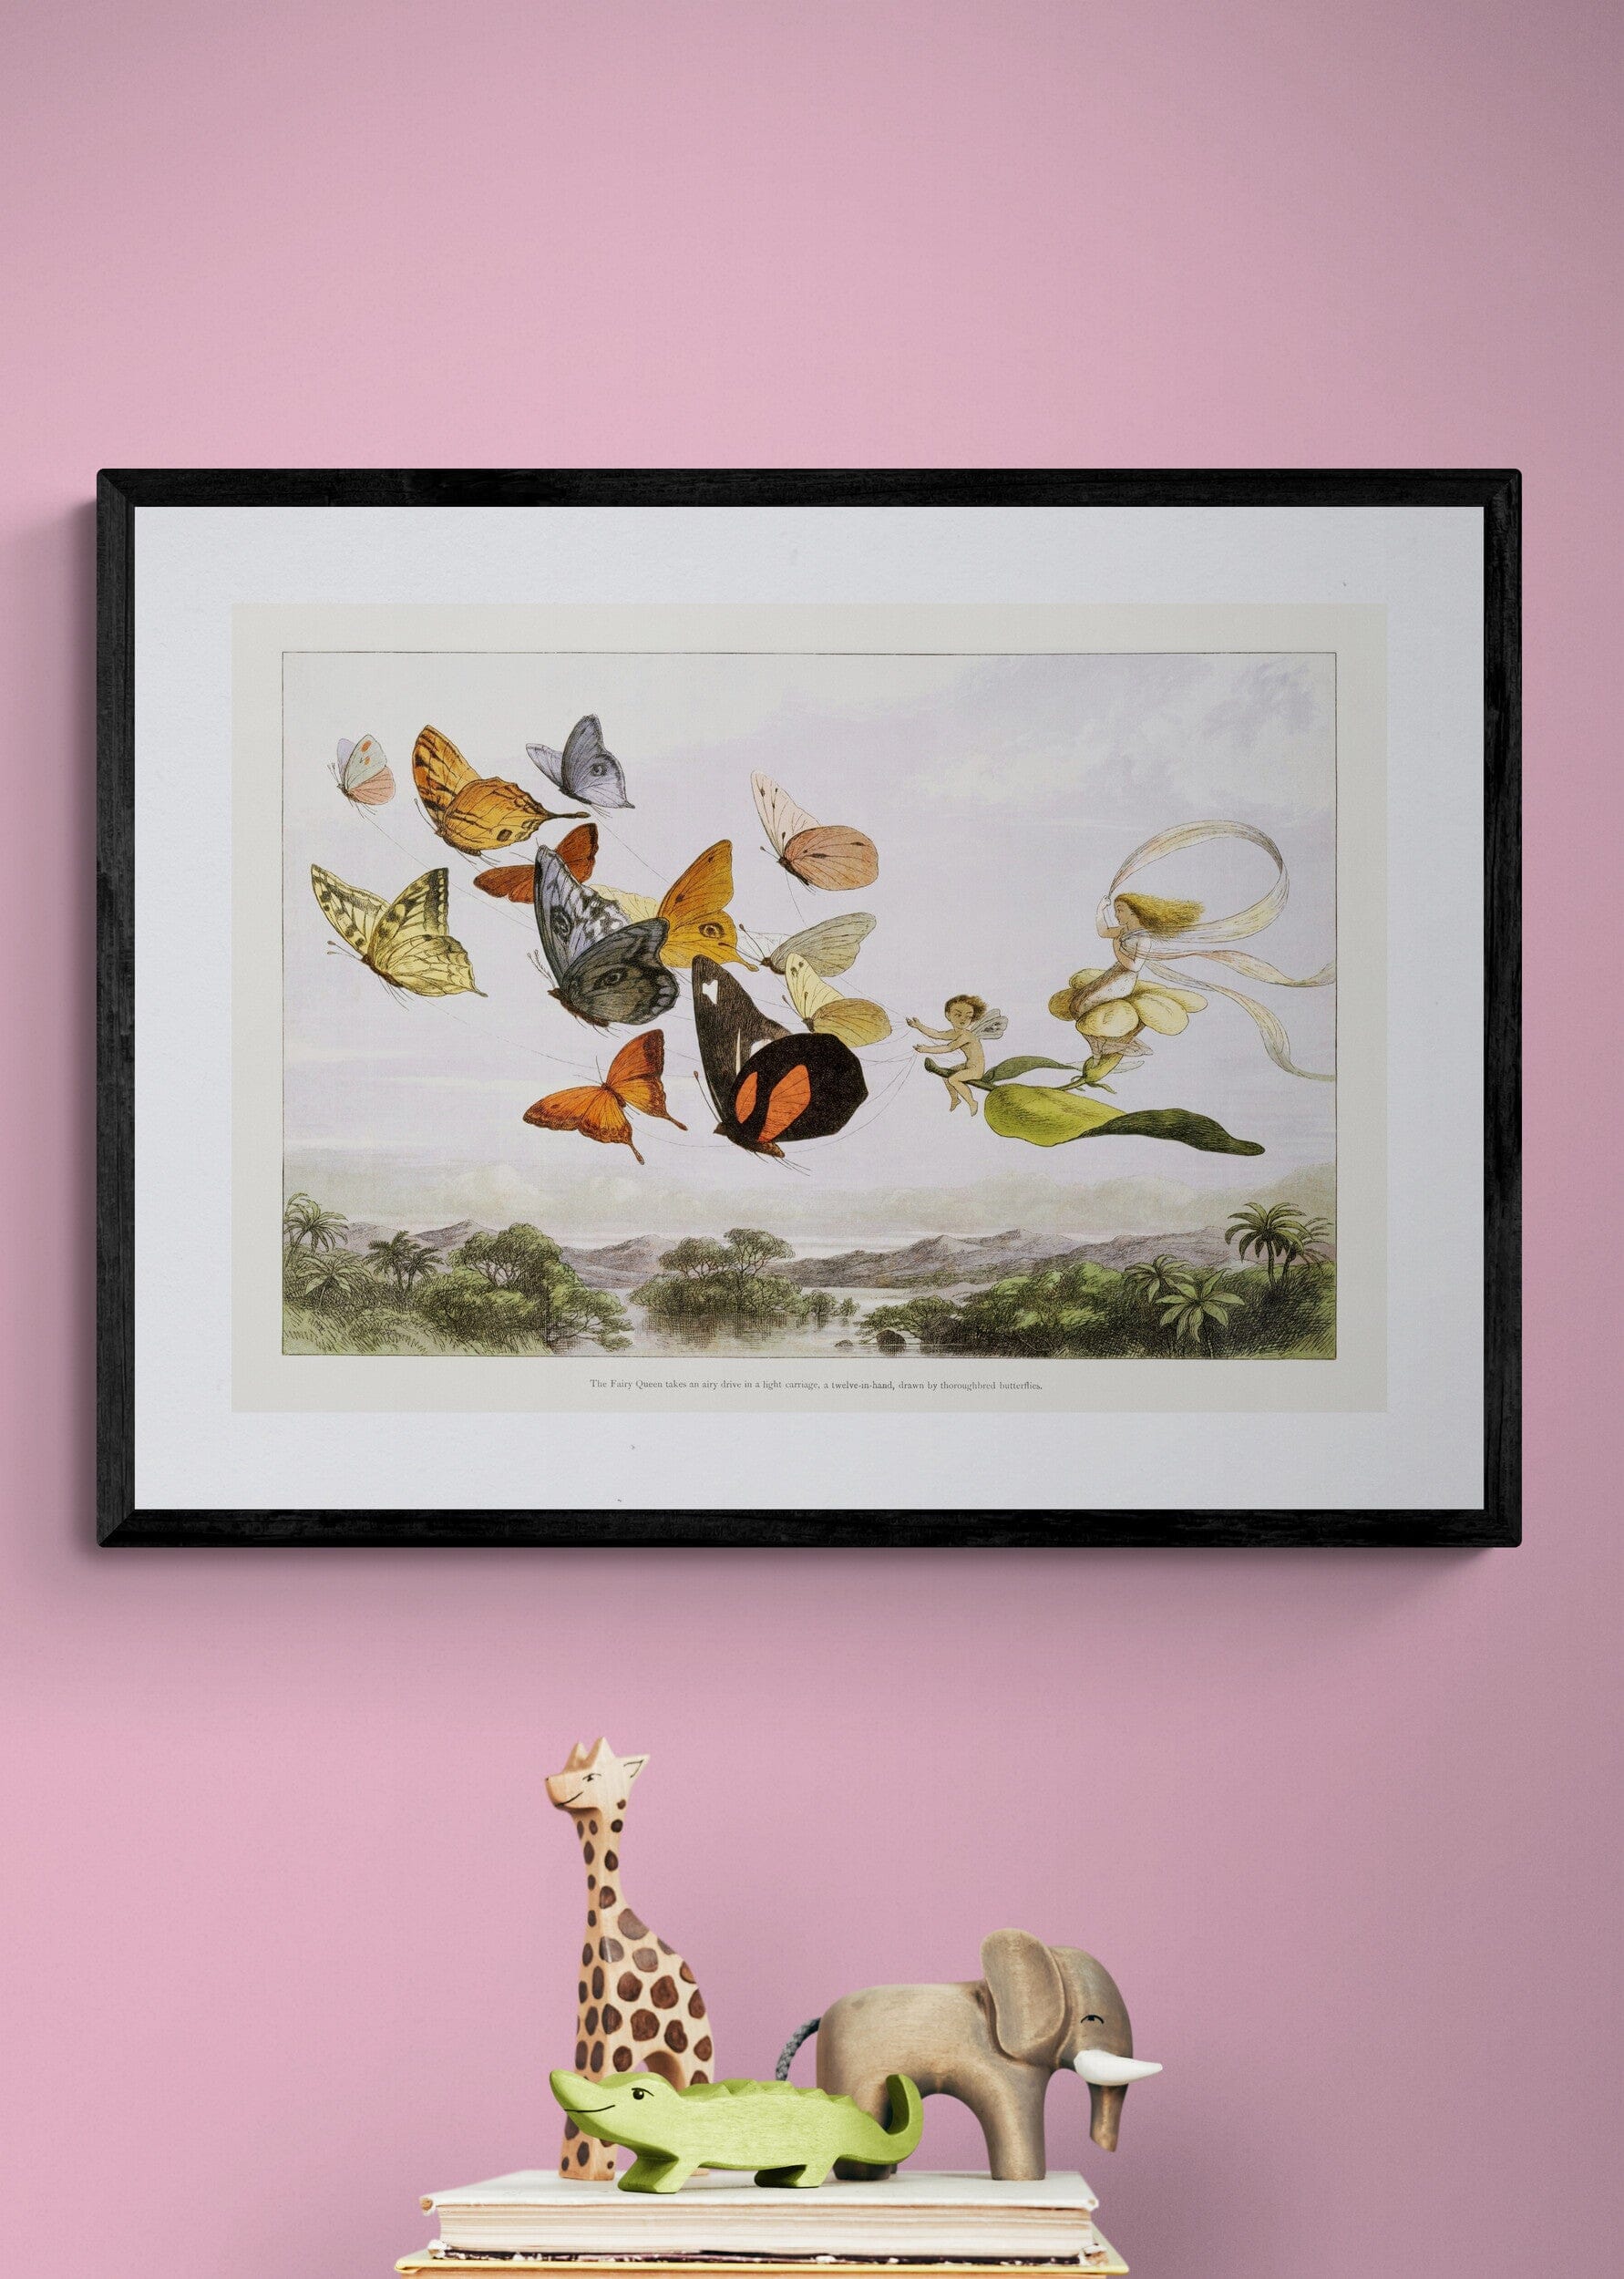 The Fairy Queen (1870 | Fairy bedroom decor | Richard Doyle Posters, Prints, & Visual Artwork The Trumpet Shop   